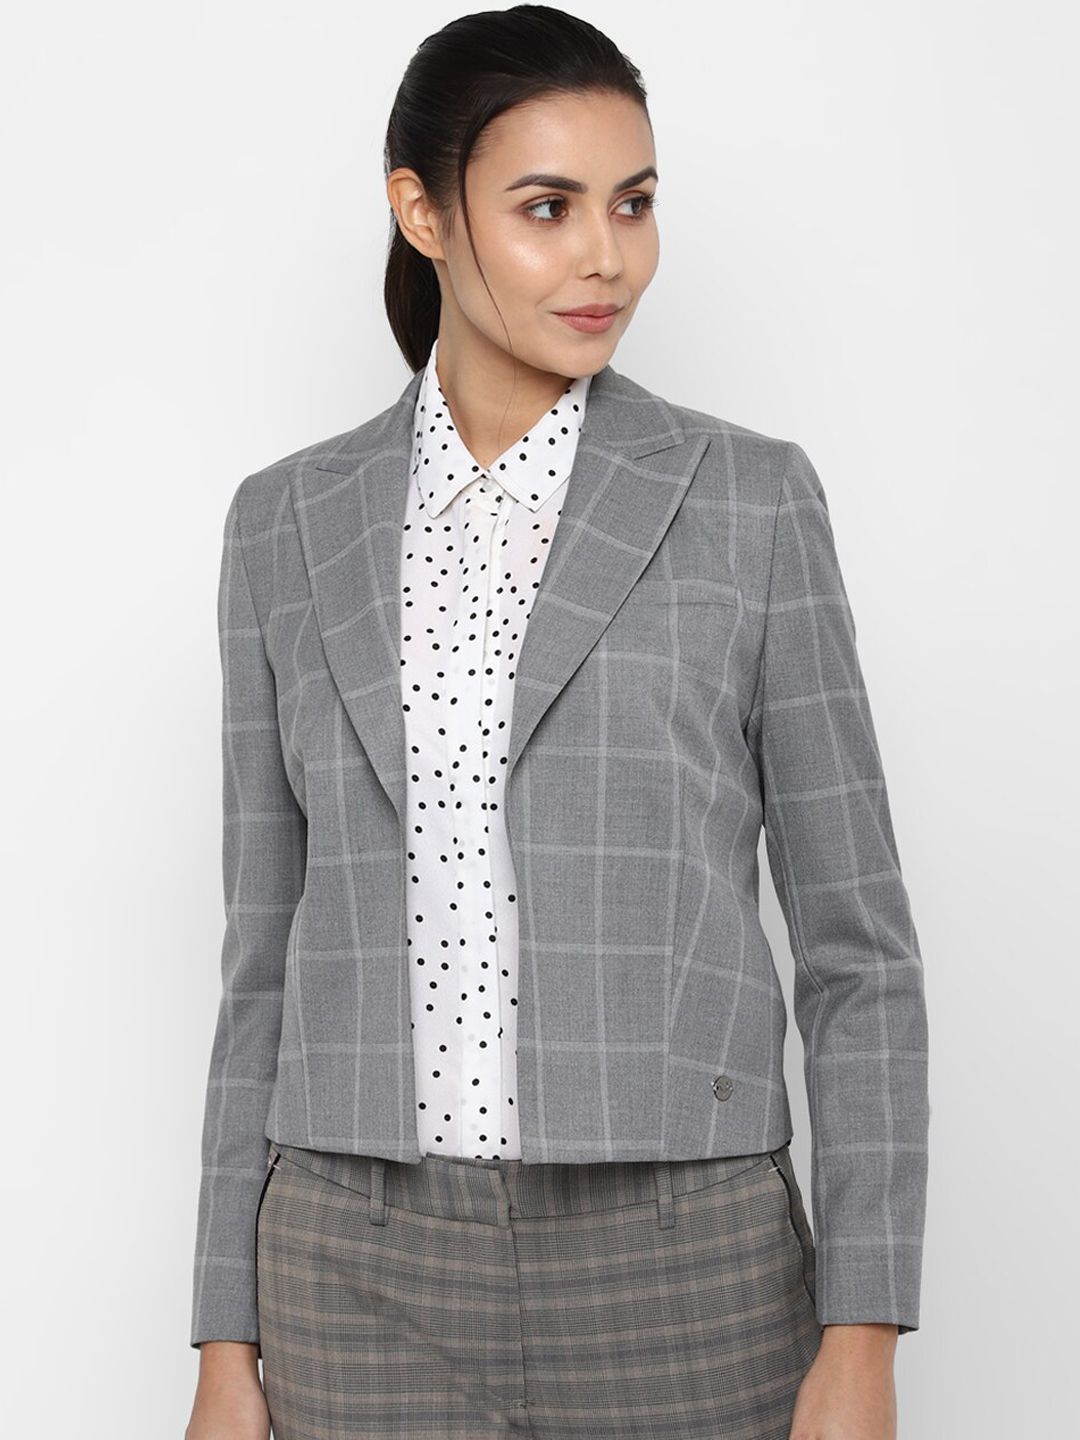 Allen Solly Women Grey Checked Single Breasted Casual Blazers Price in India